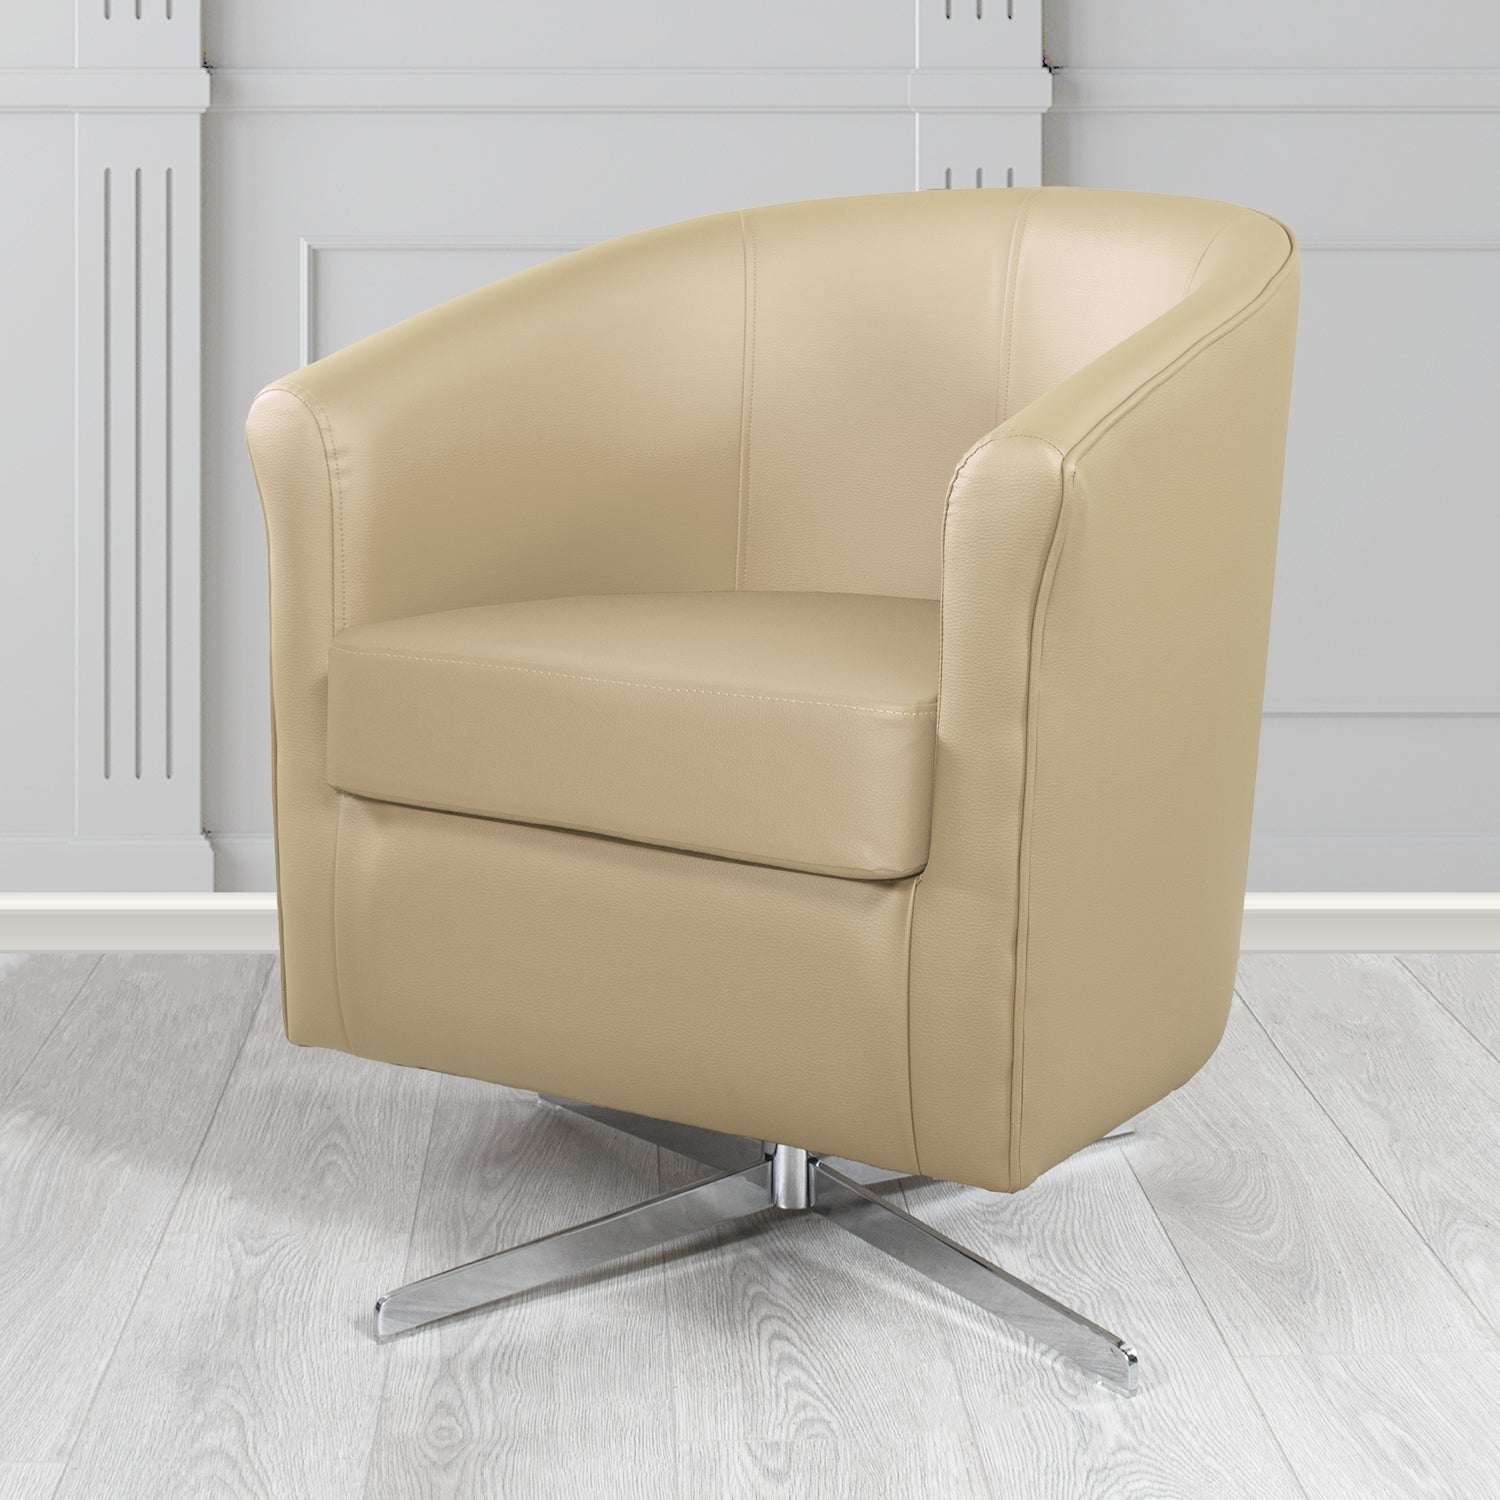 Cannes Swivel Tub Chair in Just Colour Almond Crib 5 Faux Leather - The Tub Chair Shop